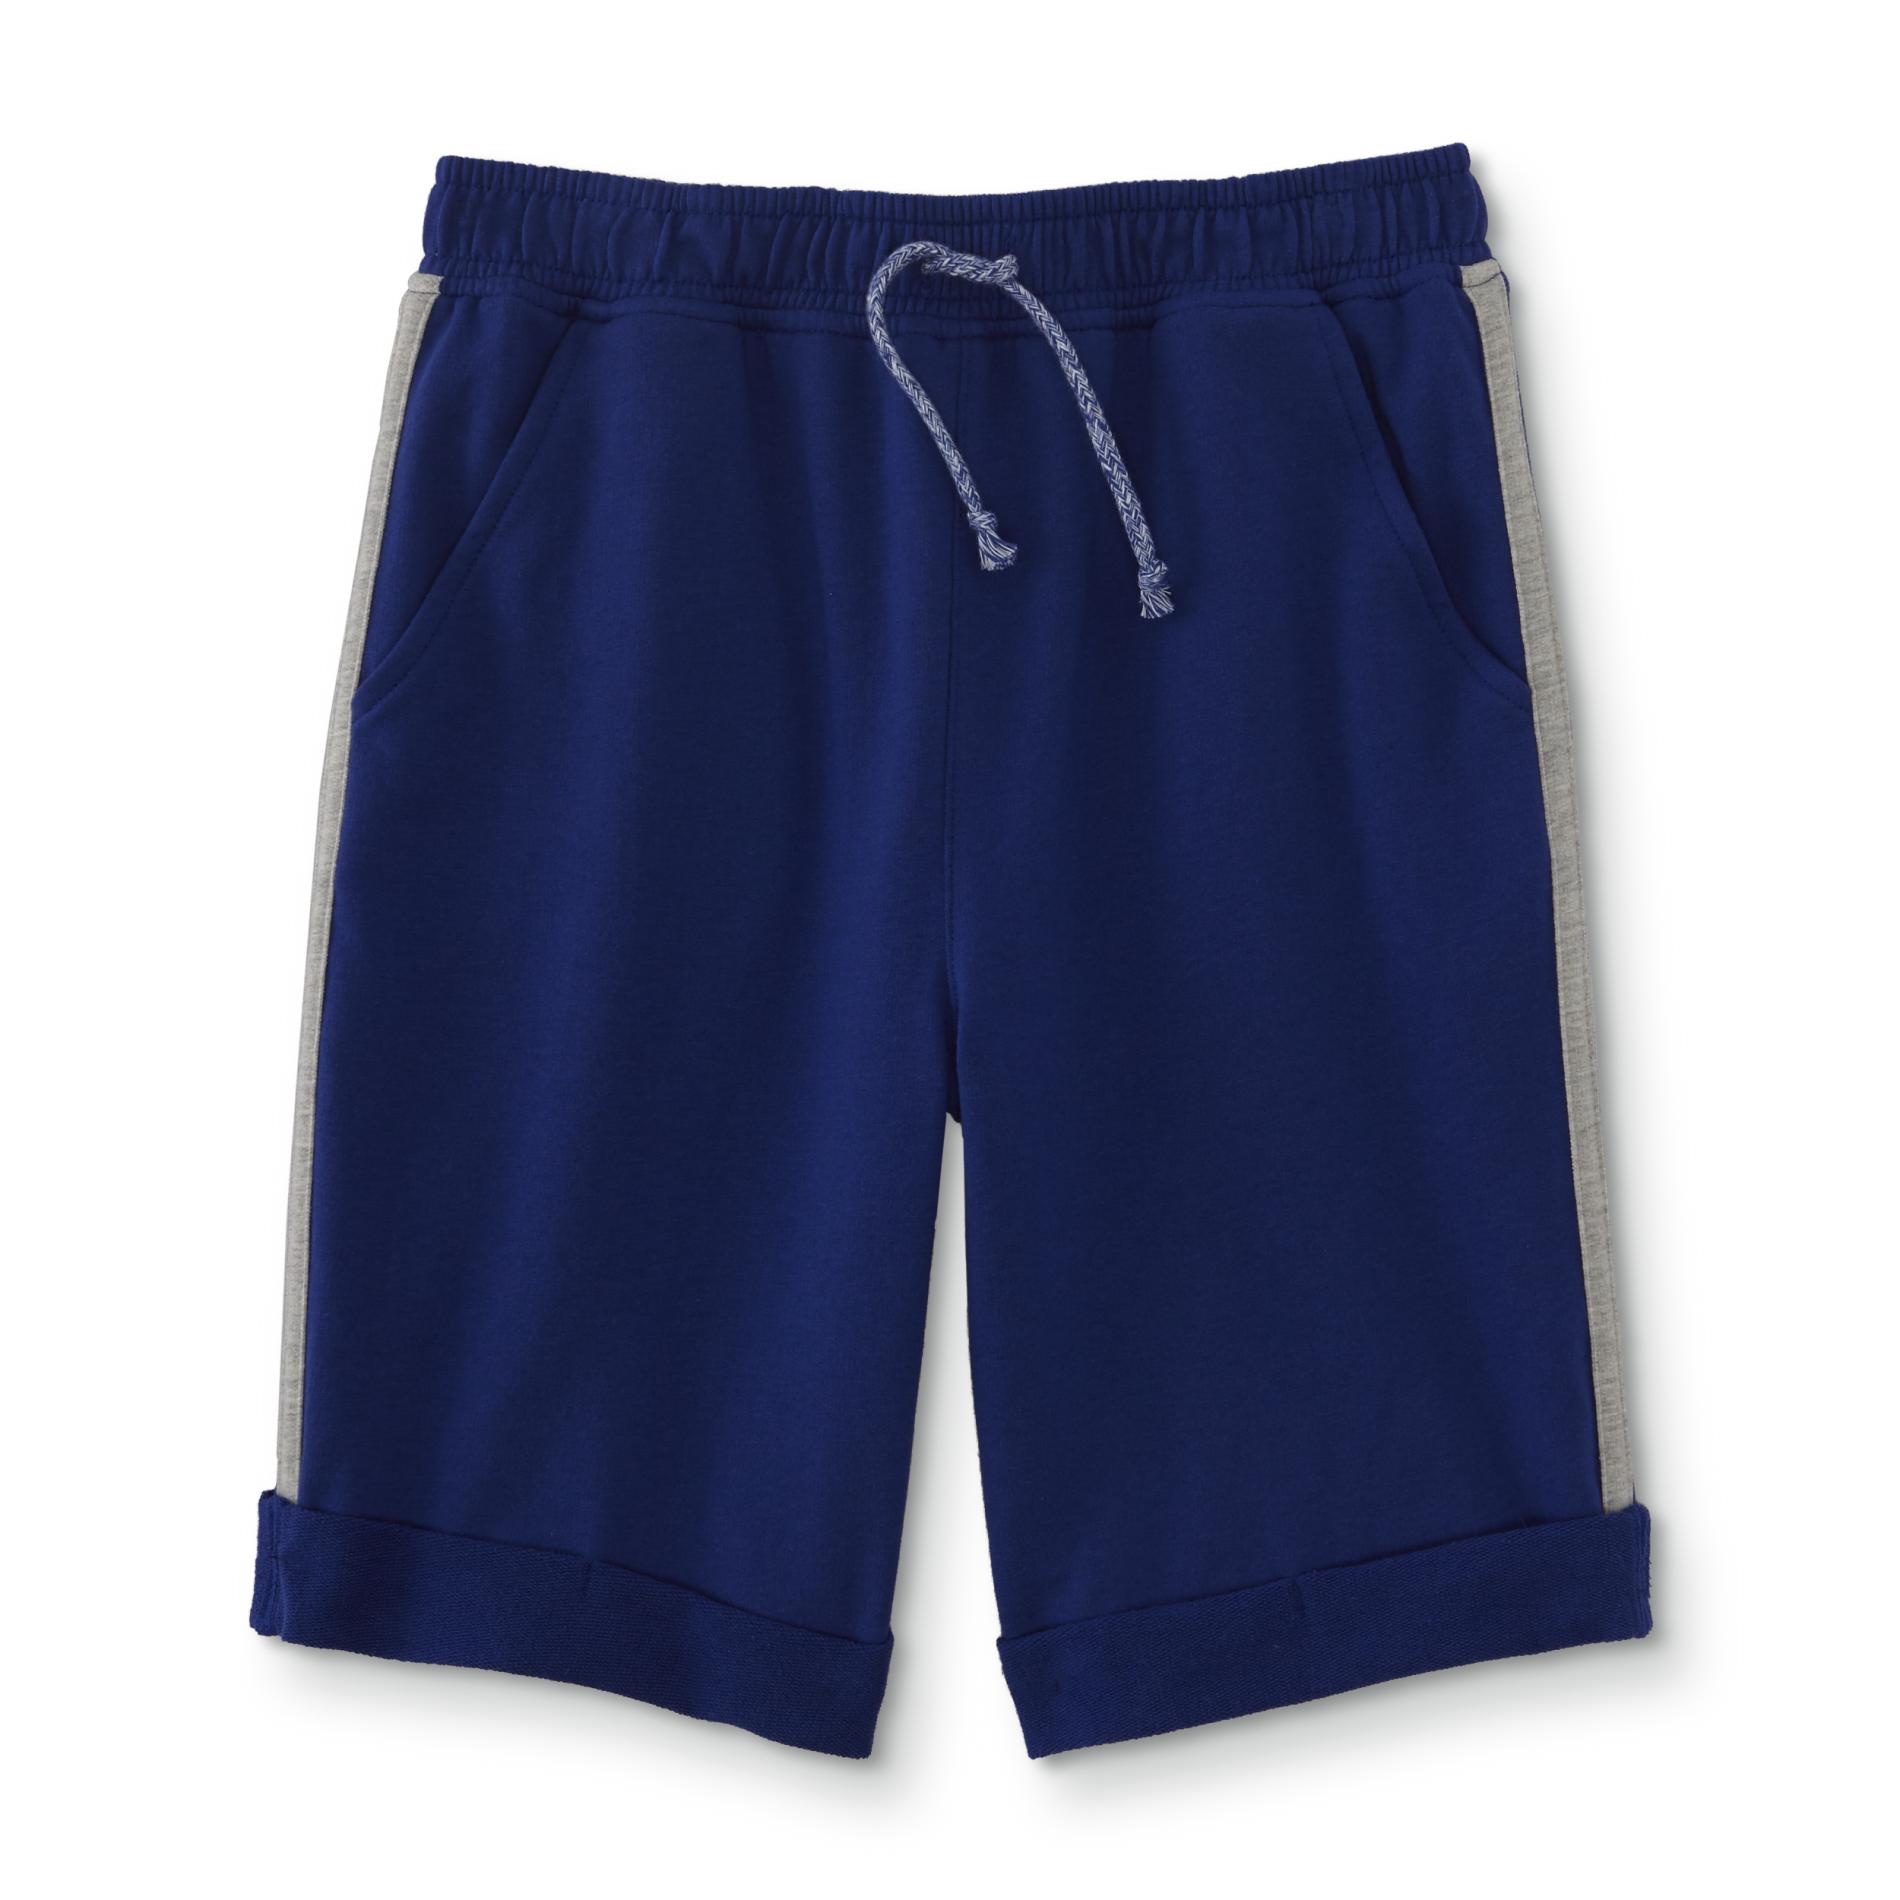 Basic Editions Boys' French Terry Basketball Shorts